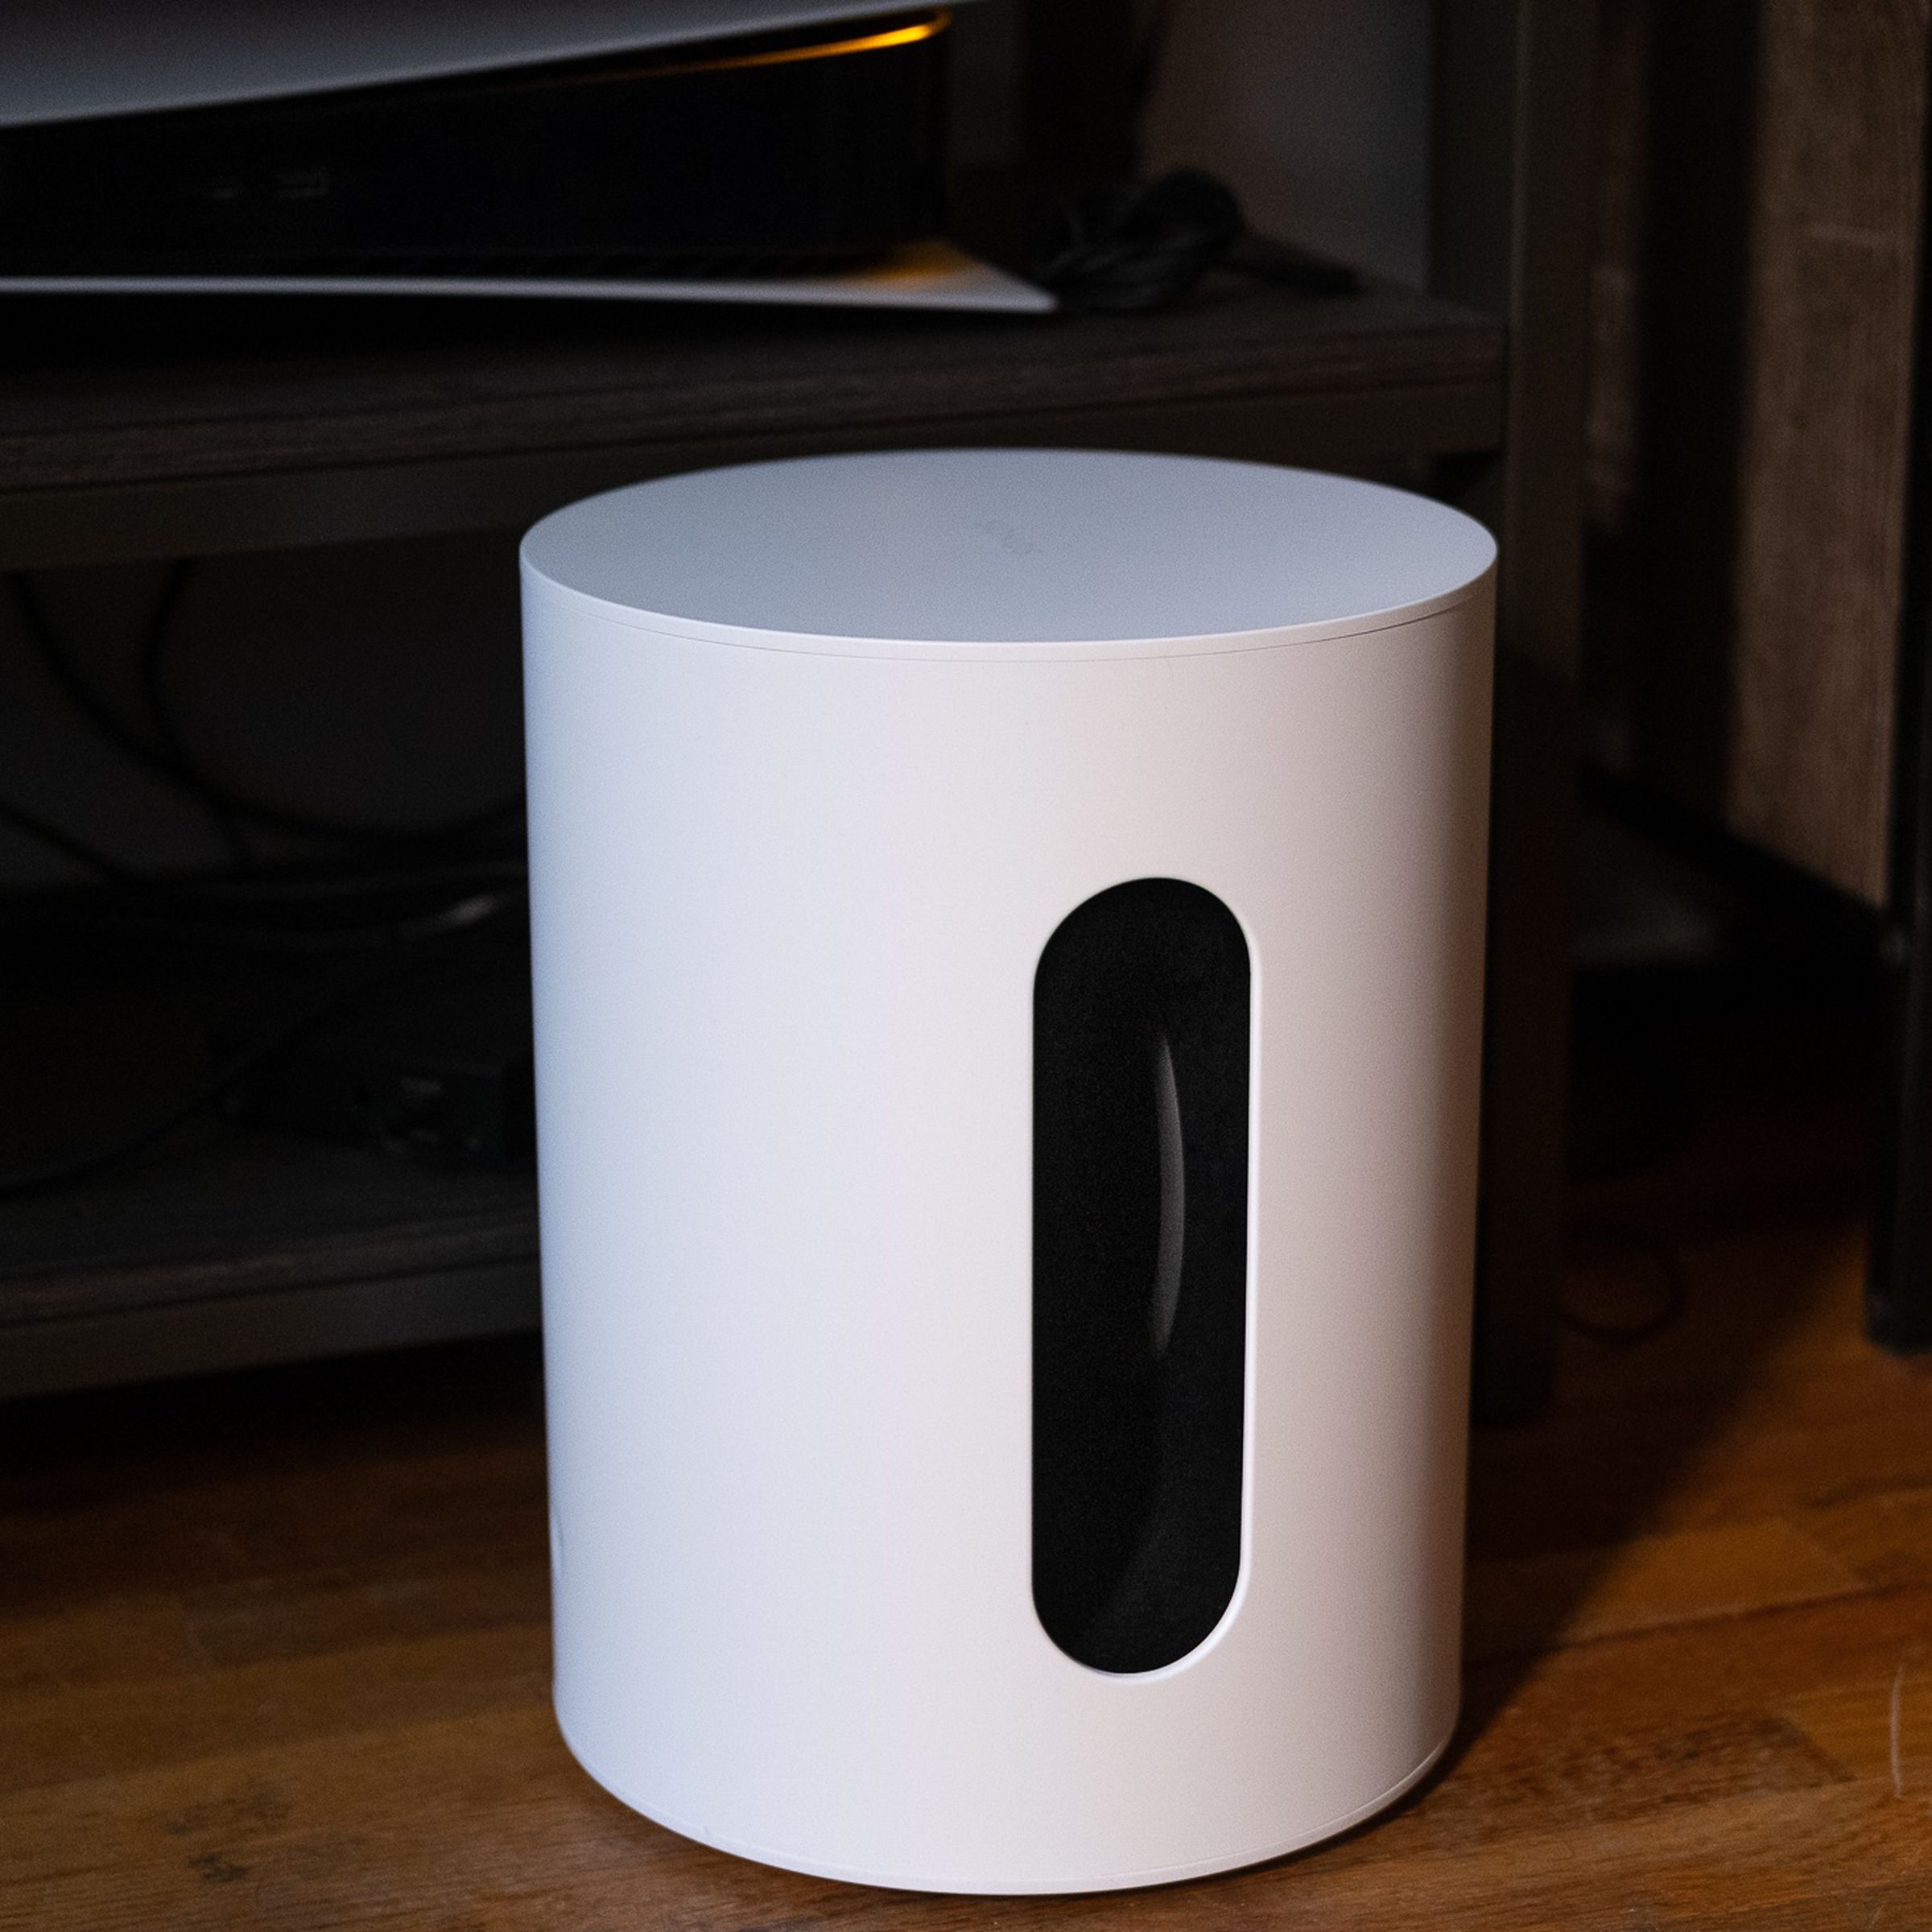 An image of the Sonos Sub Mini pictured on the floor with a TV stand and various components behind it.